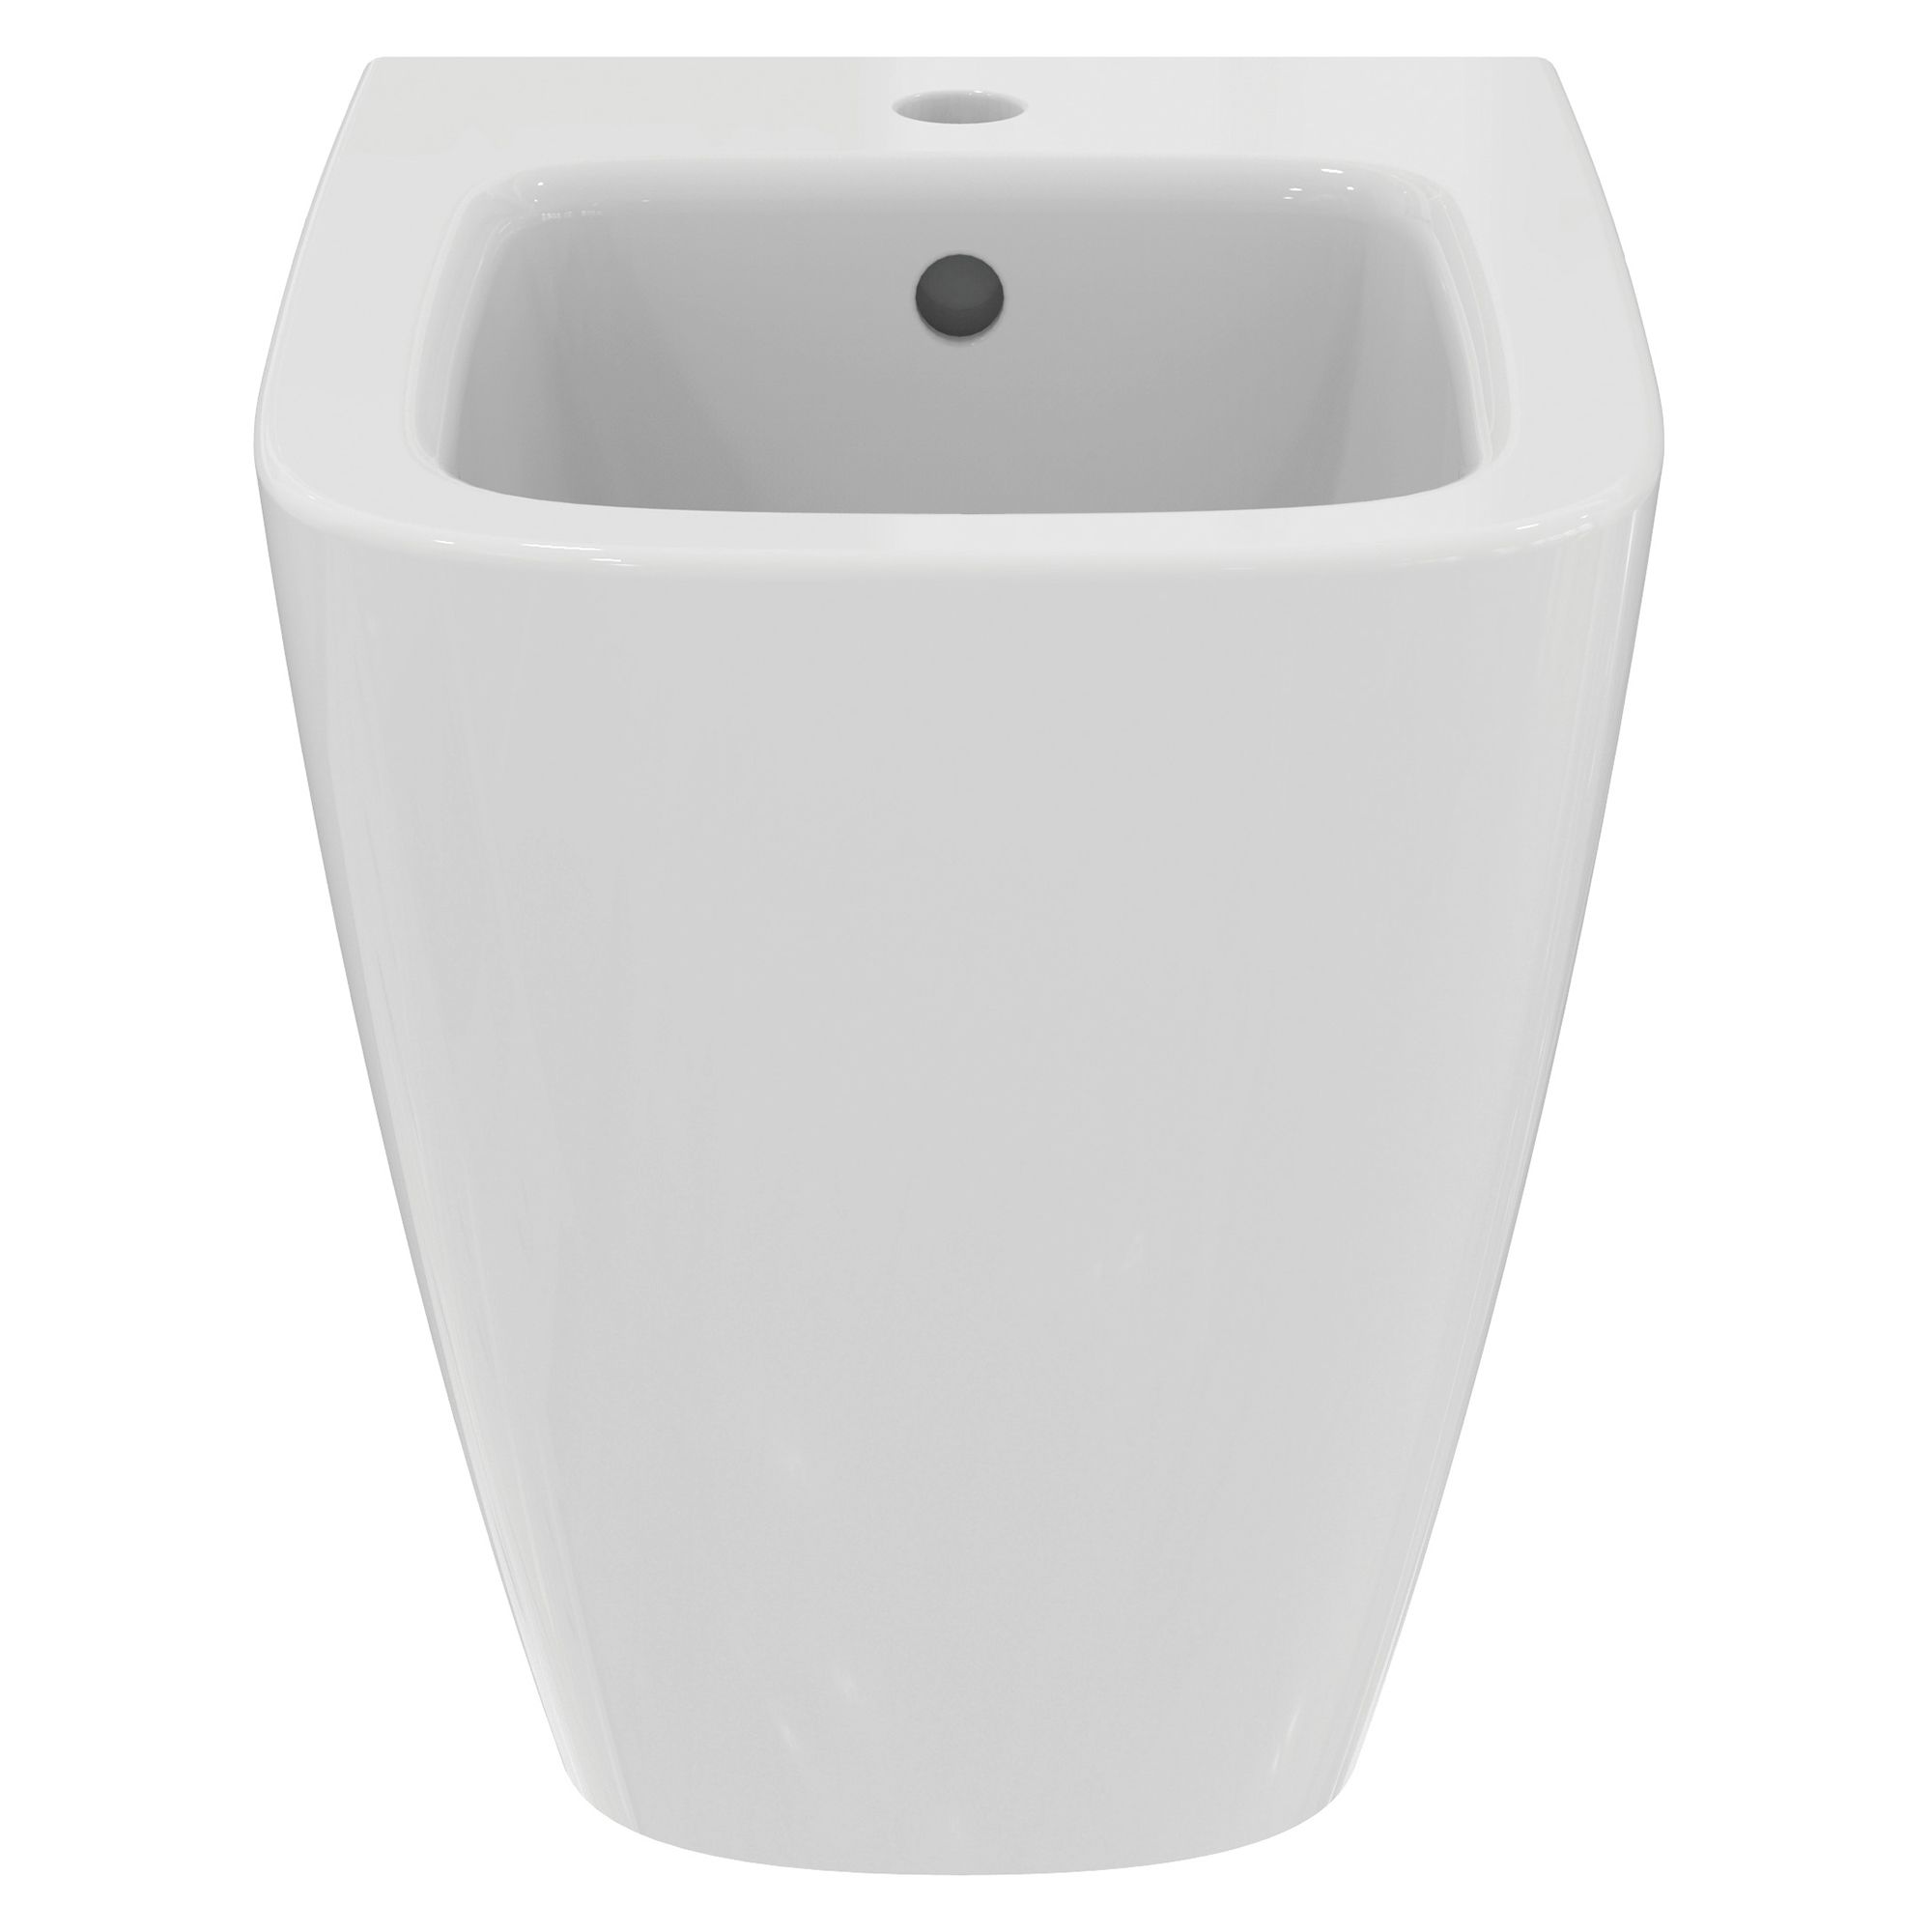 Ideal Standard i.life S White Back to wall Floor-mounted T459501 Bidet